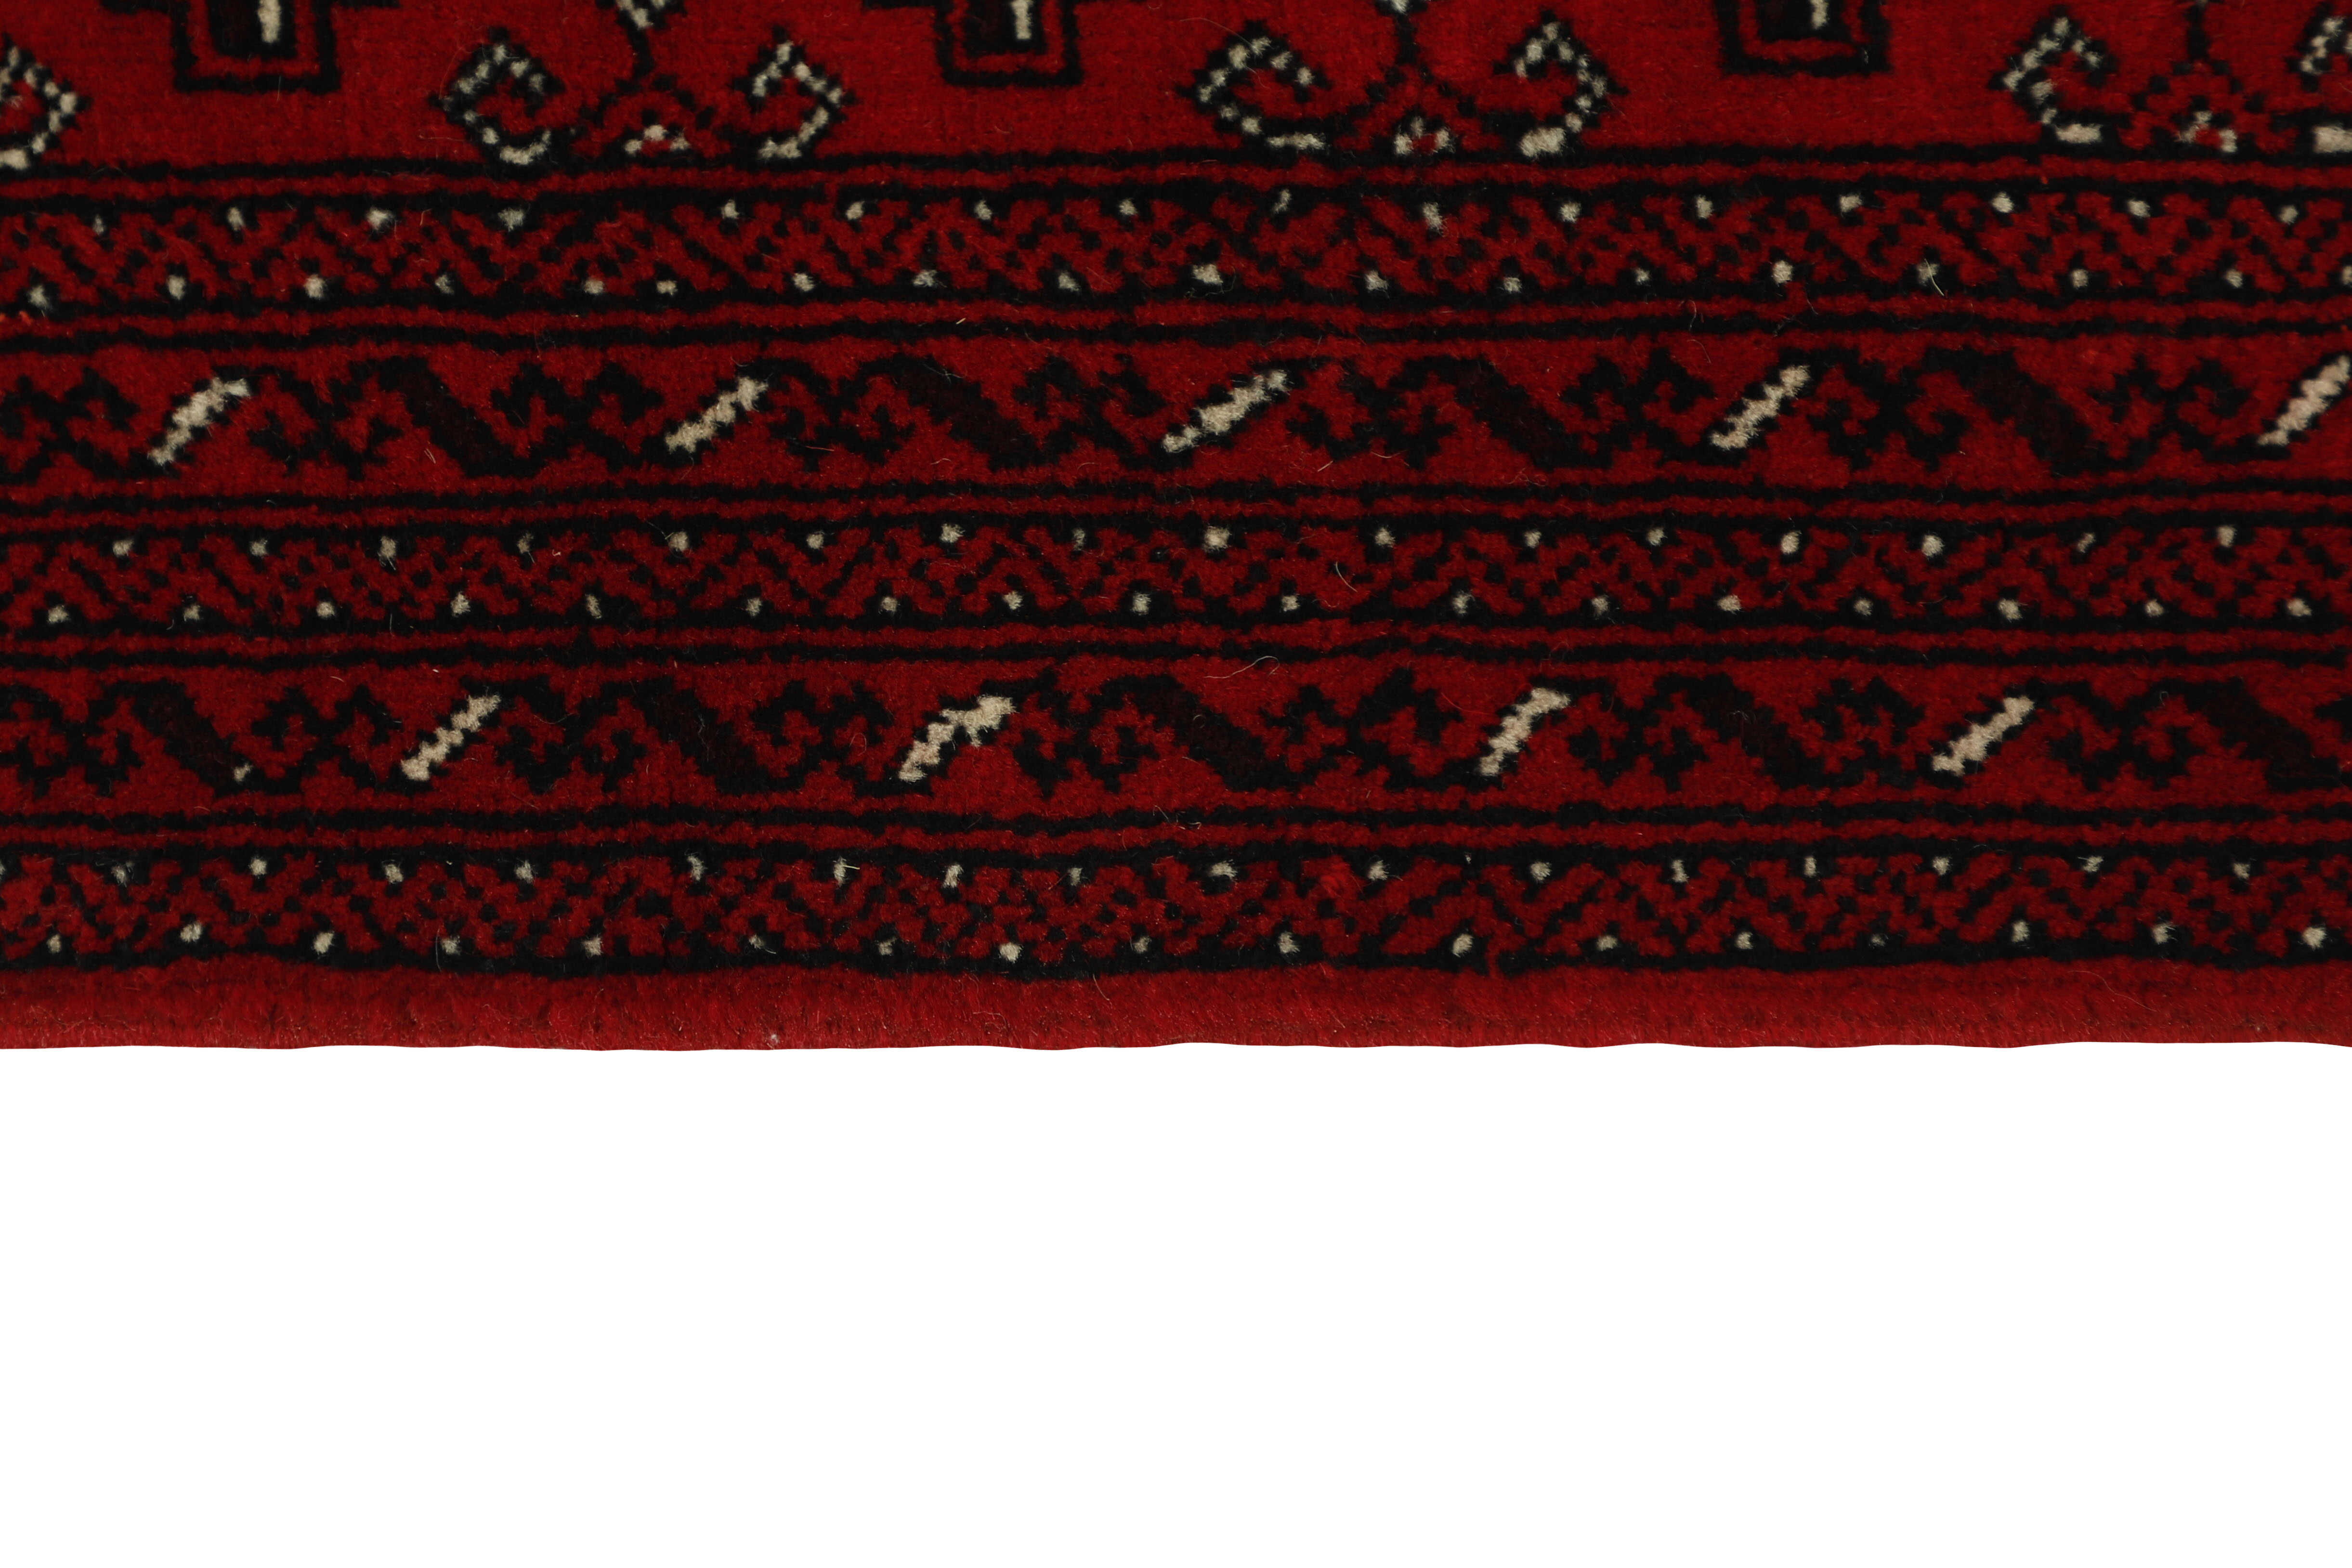 authentic red and black persian runner